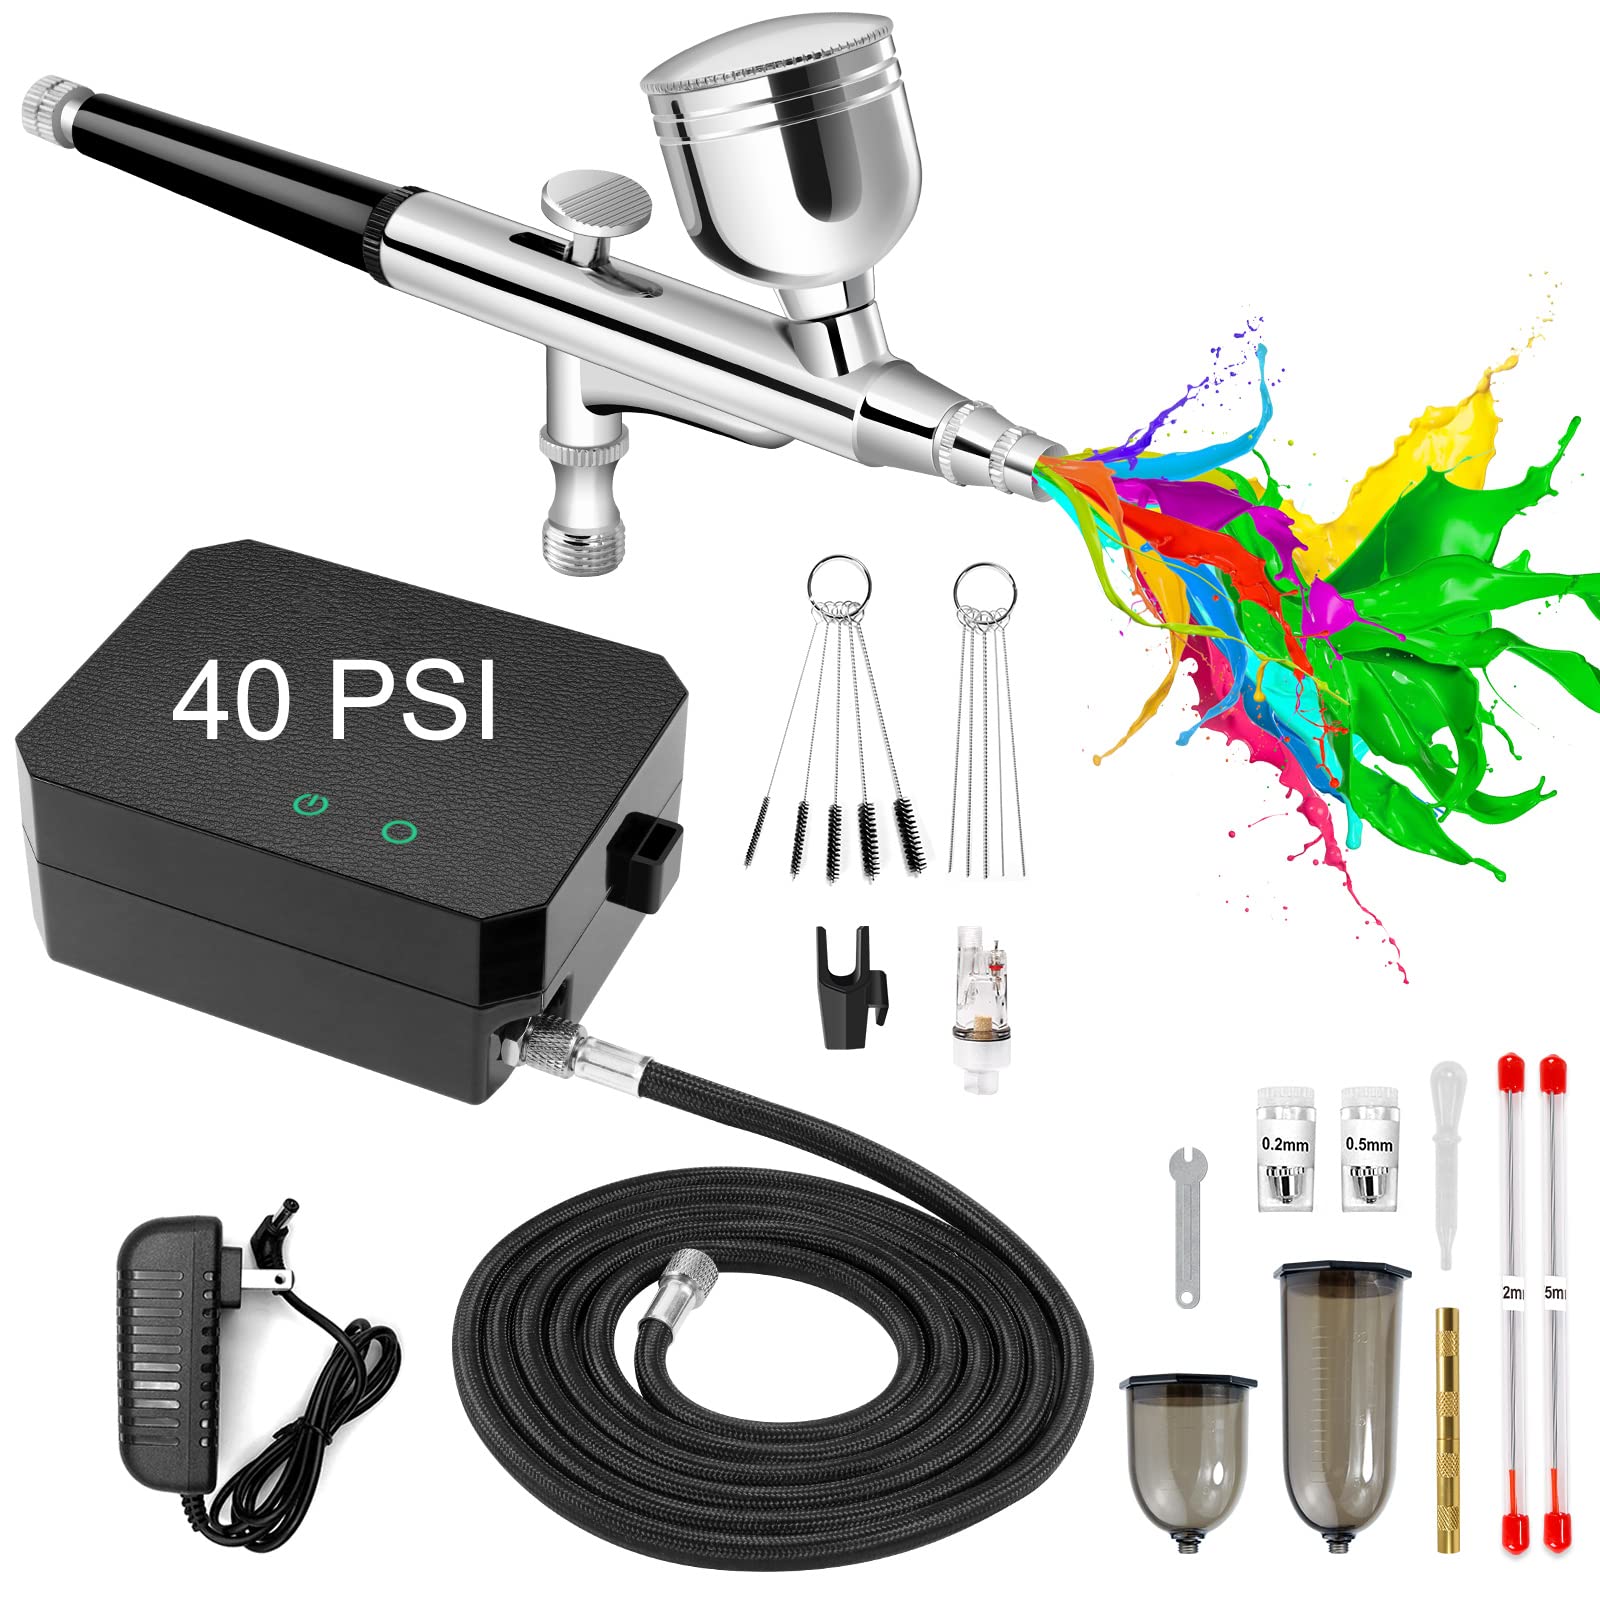 COSVII Airbrush Kit Upgraded 40 PSI Air Brush Painting Kit with Compressor  Gravity Feed Dual Action Airbrush Gun Set with 0.2/0.3/0.5 mm Nozzles for  Art Model Makeup Nail Cake Decorating black 40 PSI